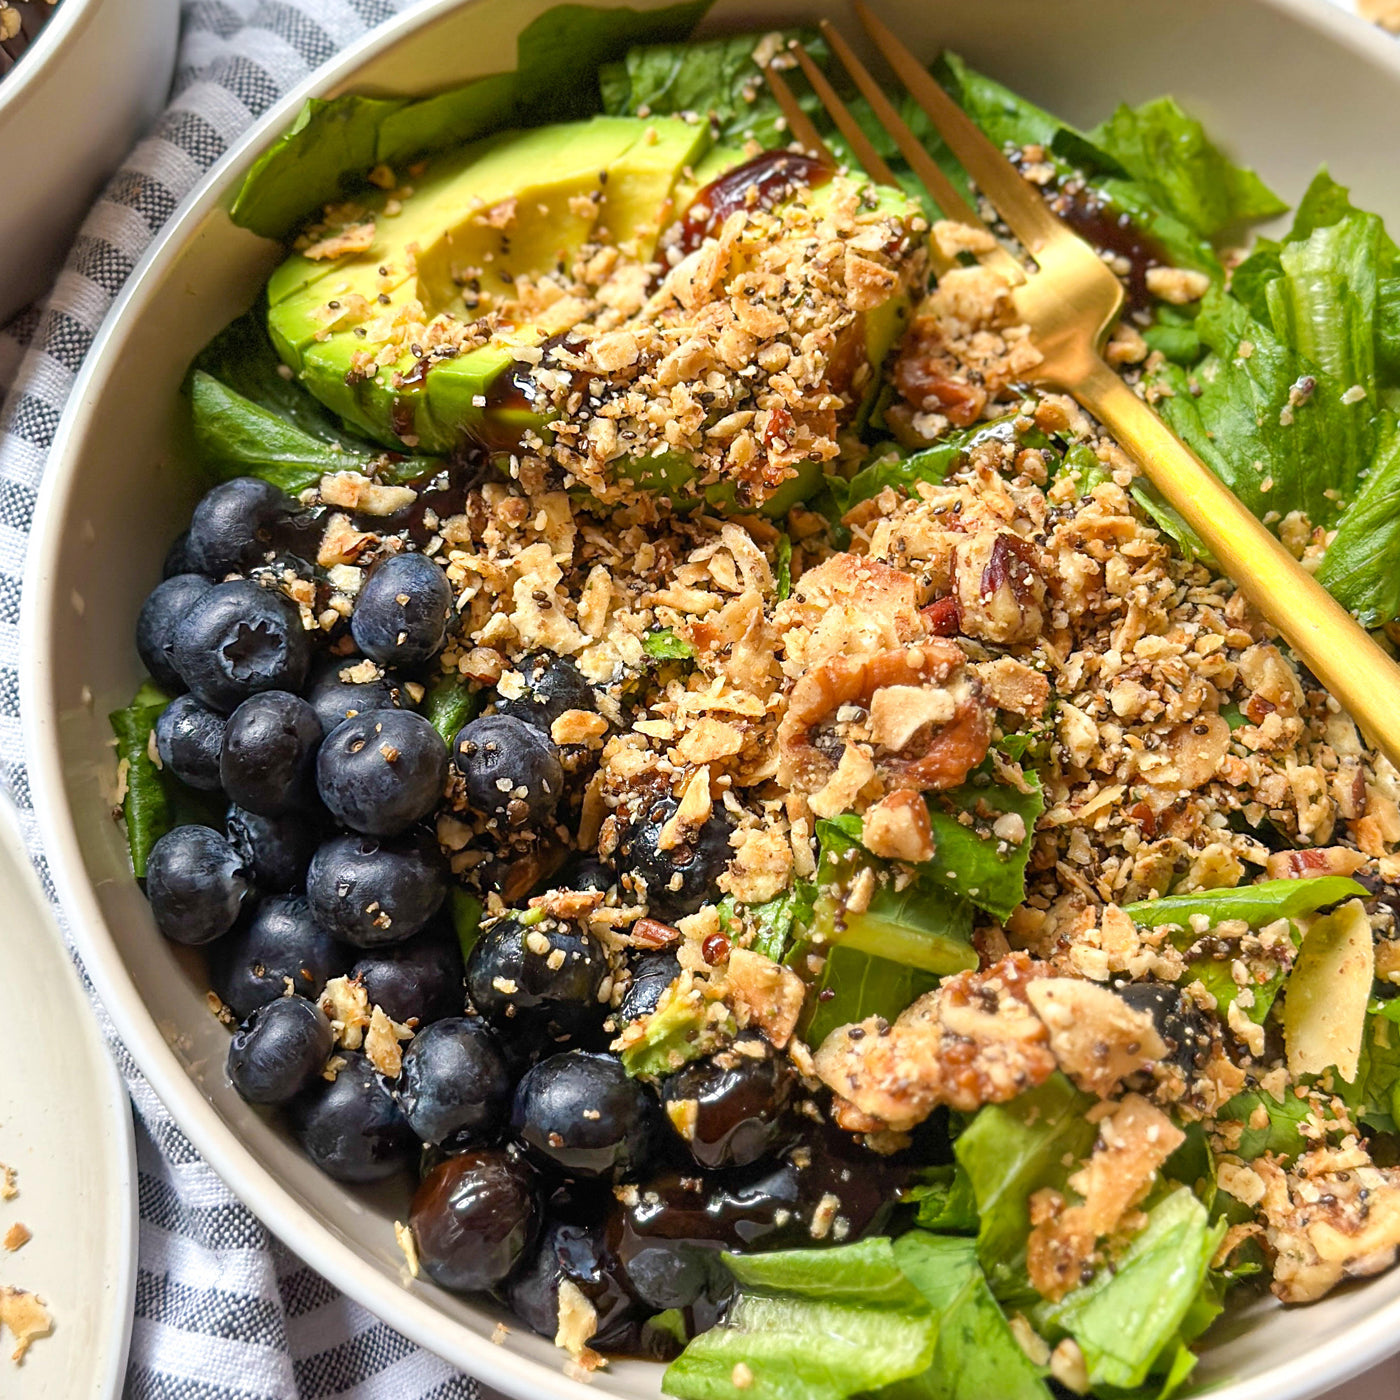 Salad with blueberries, avocado and Struesli granola in a bowl